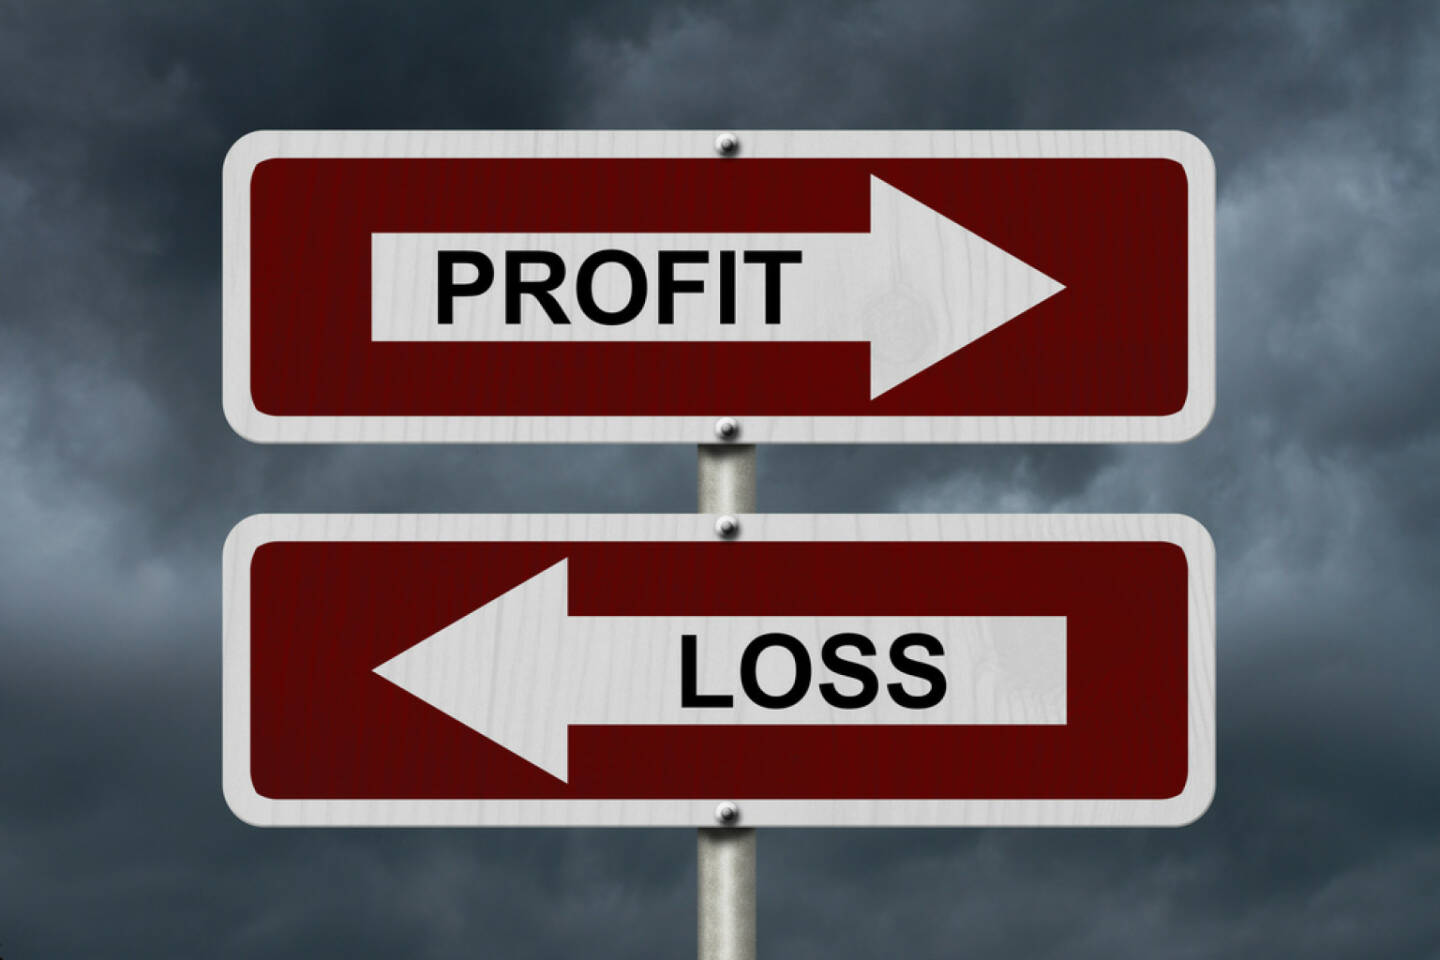 Gegenteil, Gewinn, Verlust, Profit, Loss, http://www.shutterstock.com/de/pic-246452491/stock-photo-profit-versus-loss-red-and-white-street-signs-with-words-profit-and-loss-with-stormy-sky-background.html